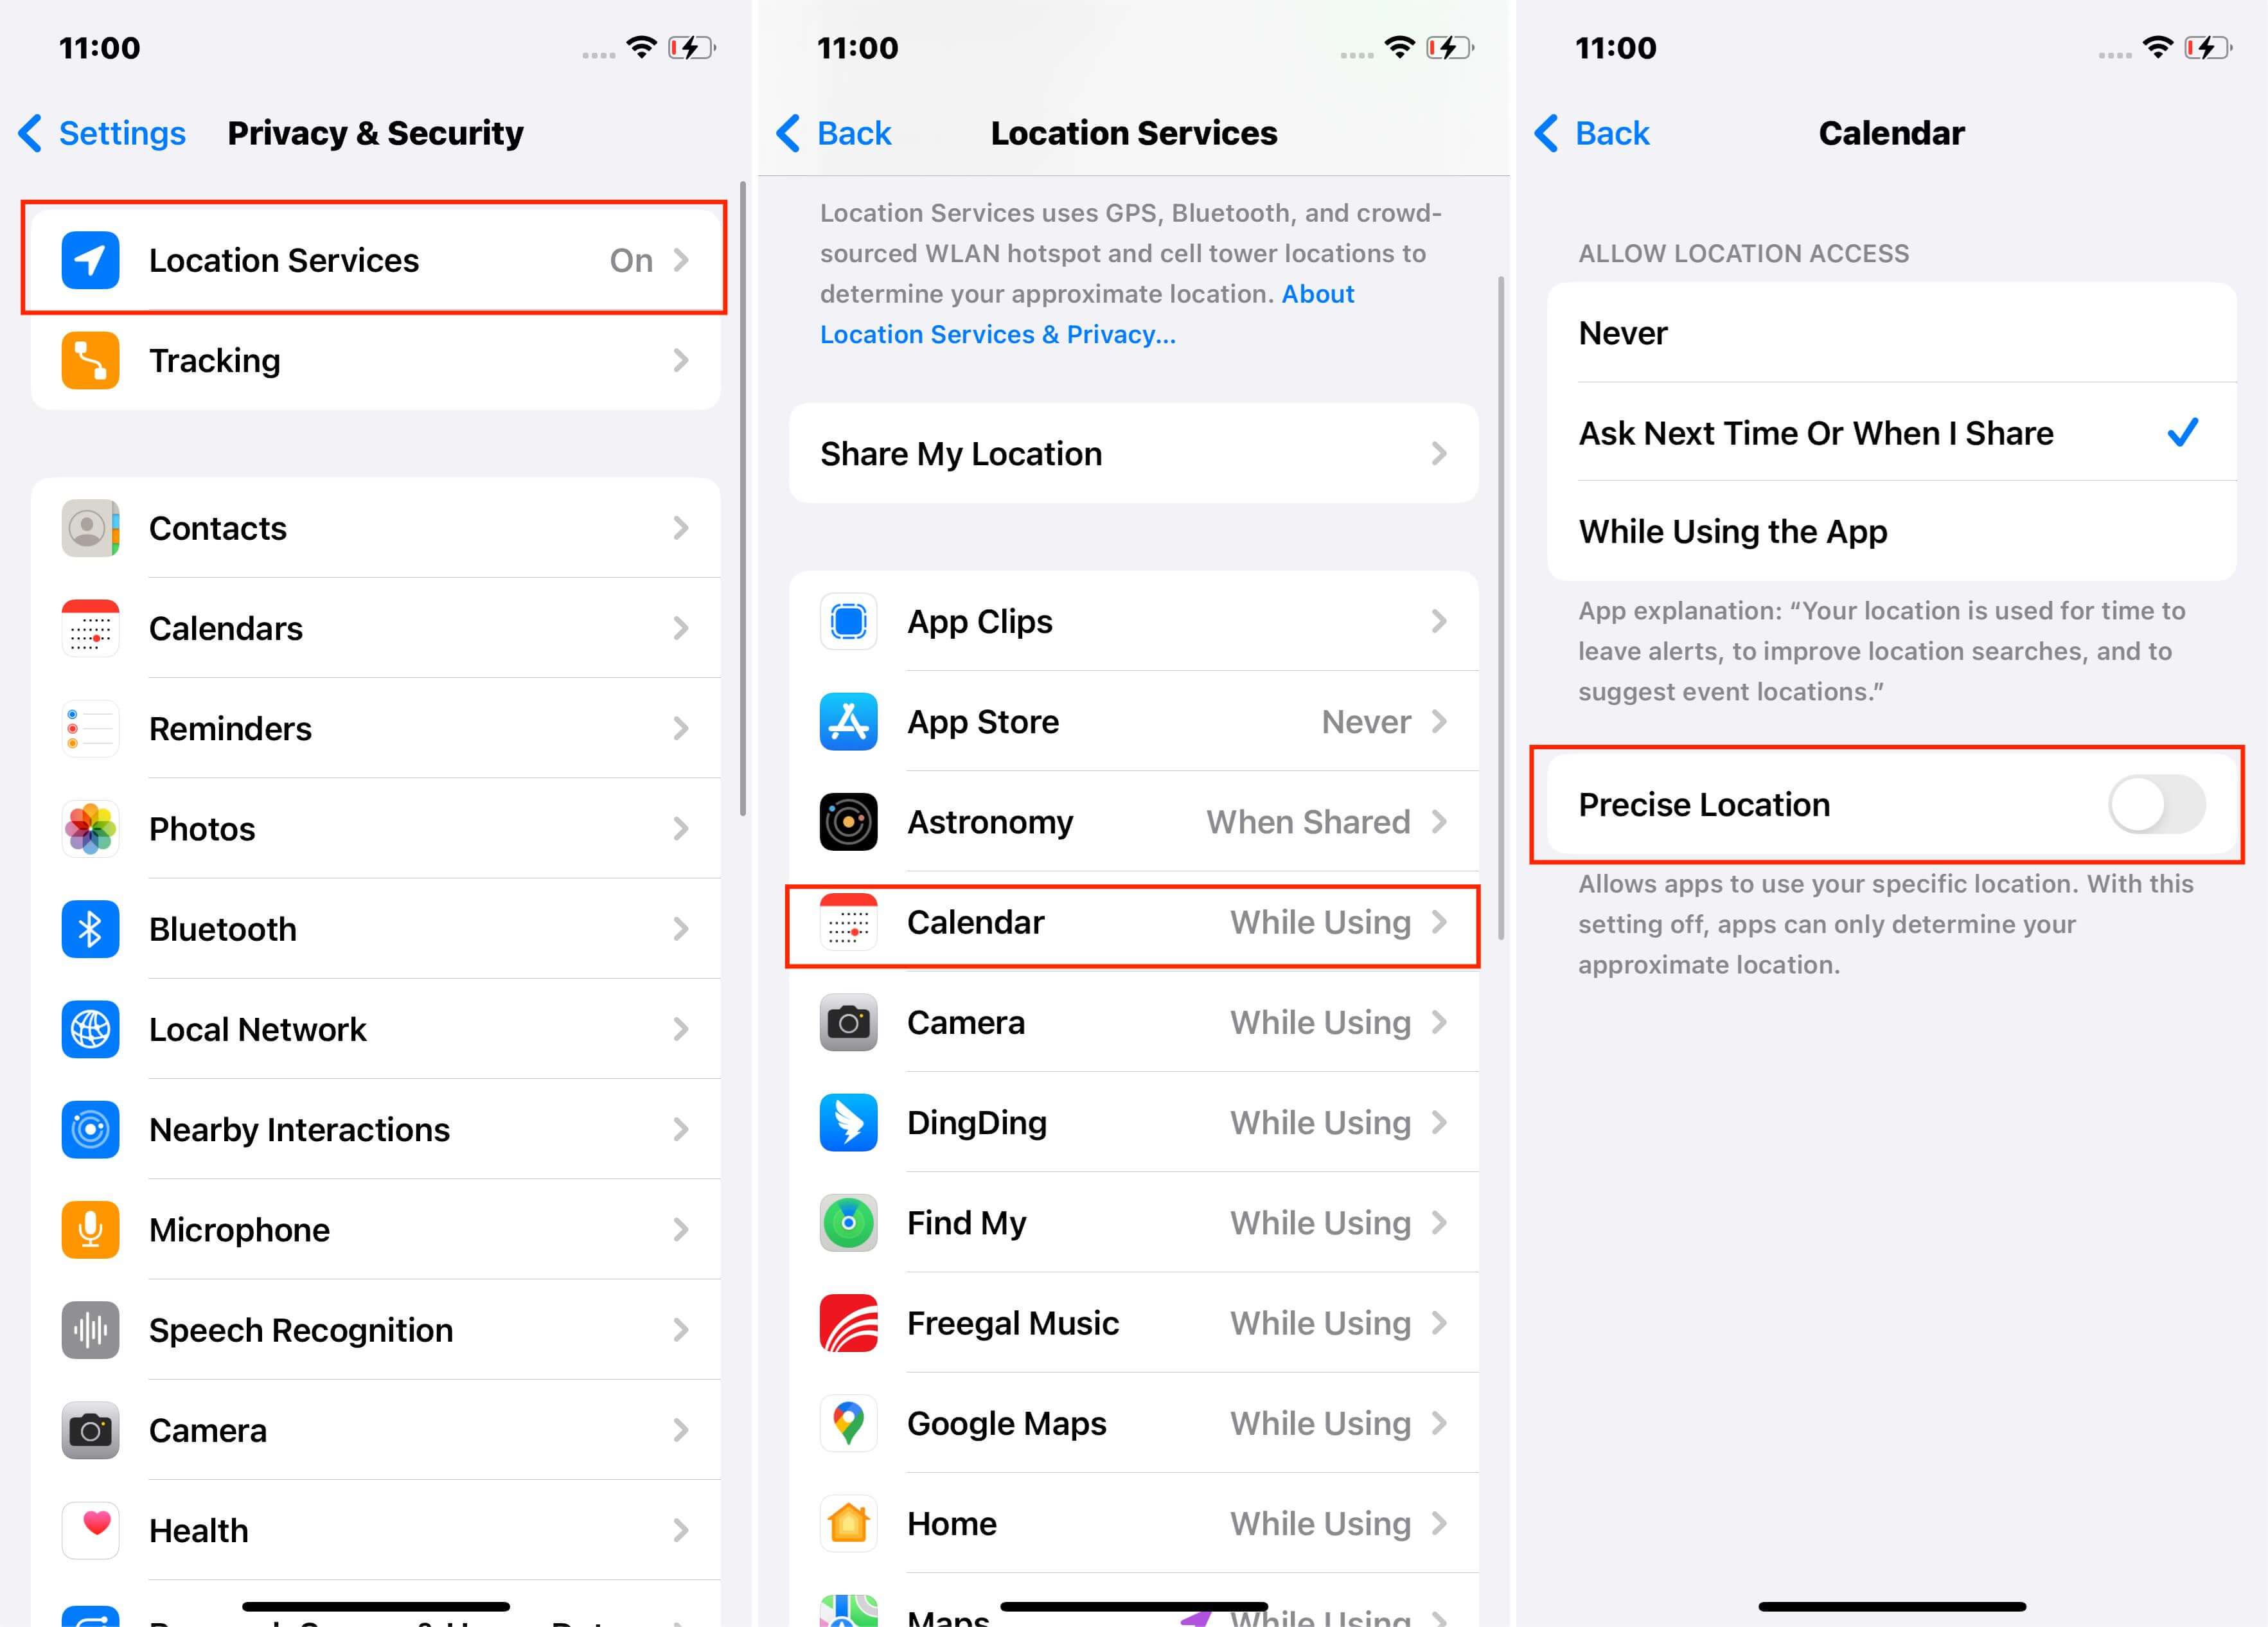 Steps to Turn off Precise Location on iPhone Settings for Calendar